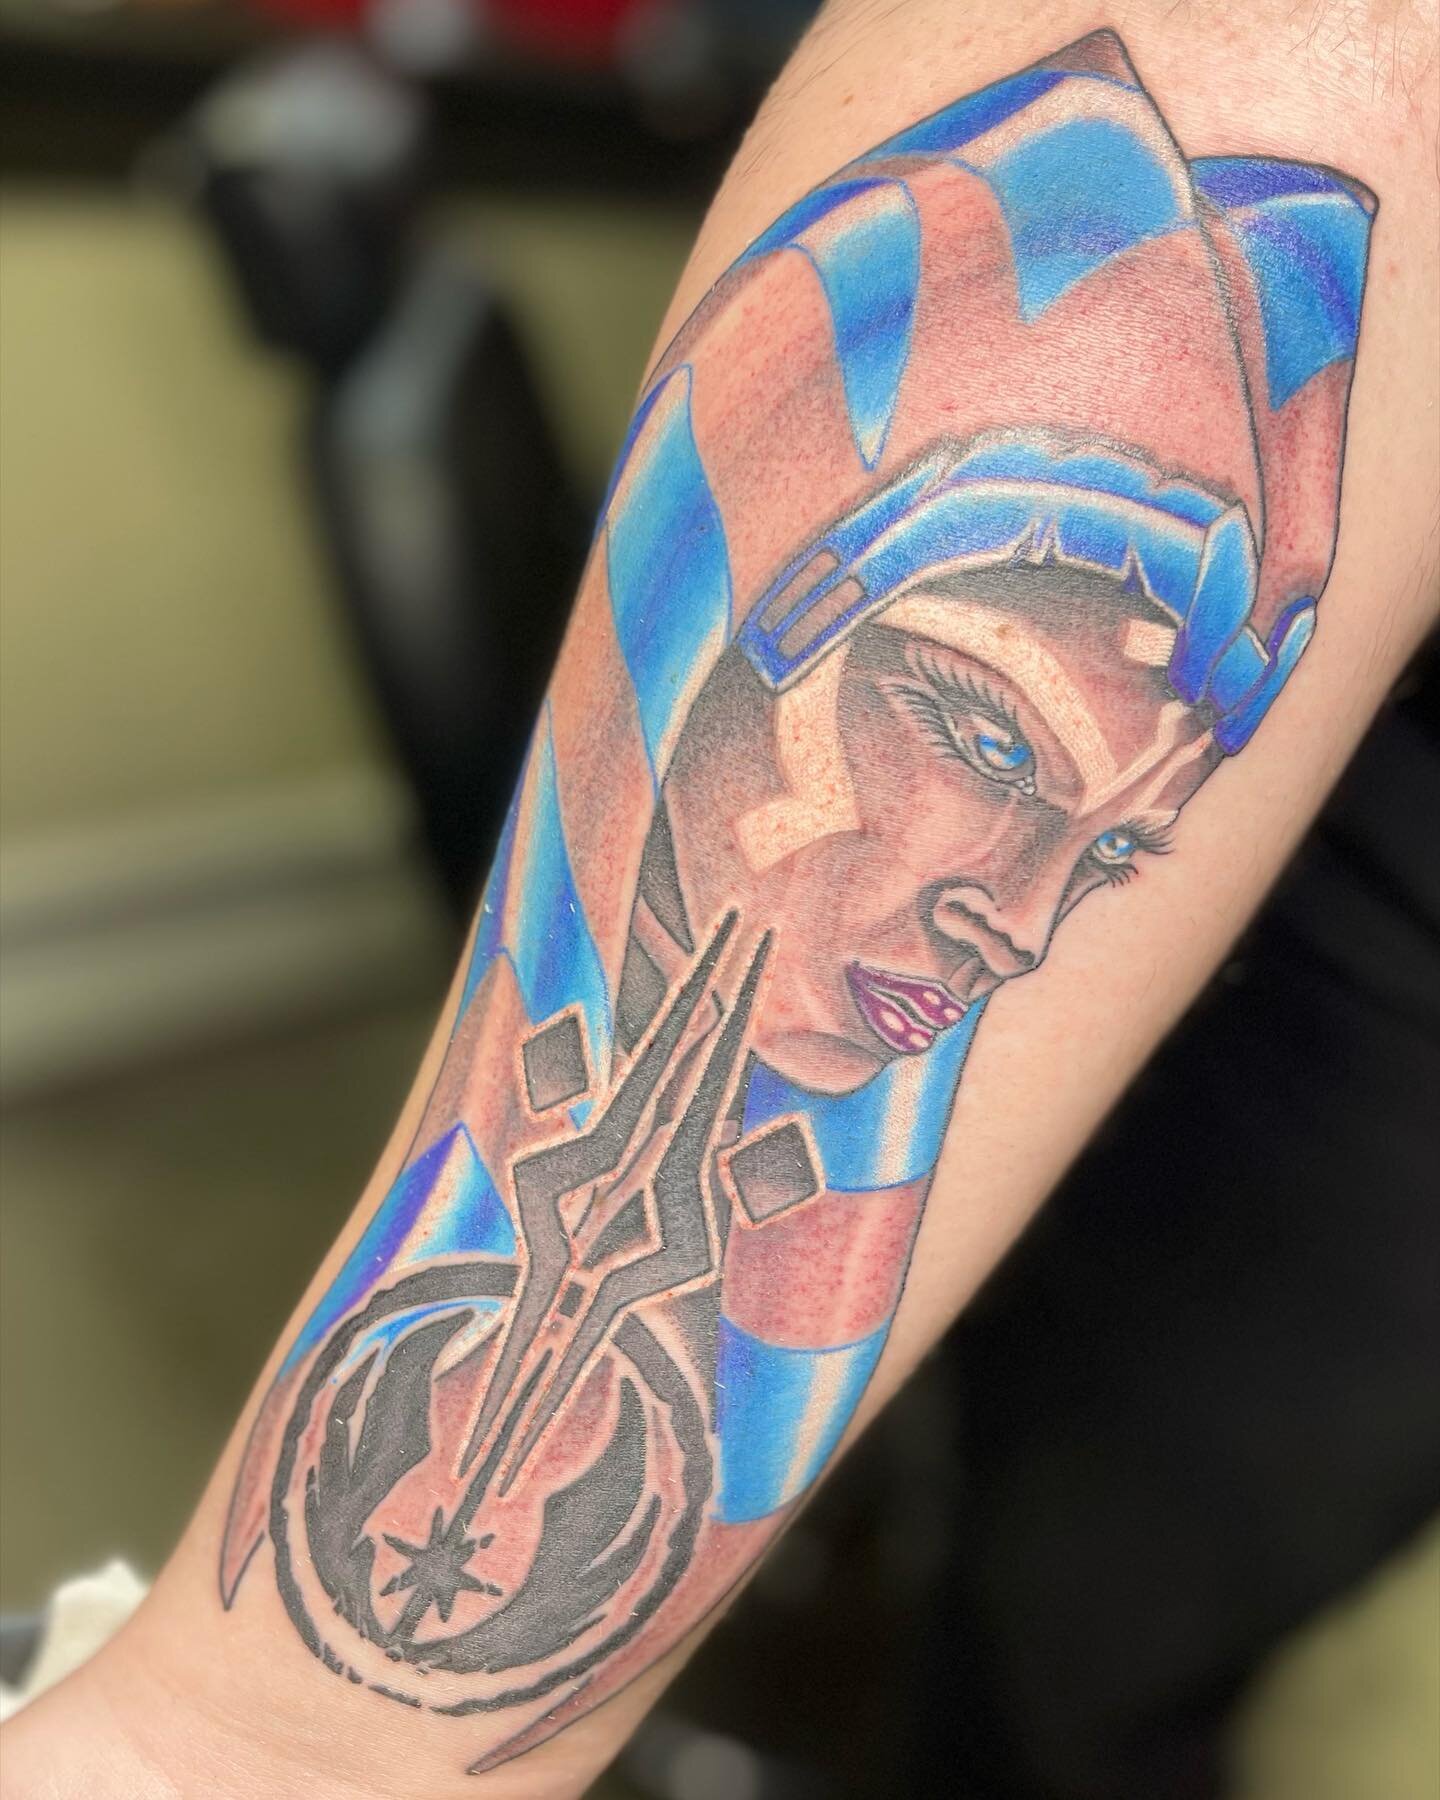 May the Forth be with you! Loved doing this Ahsoka Tano tattoo!